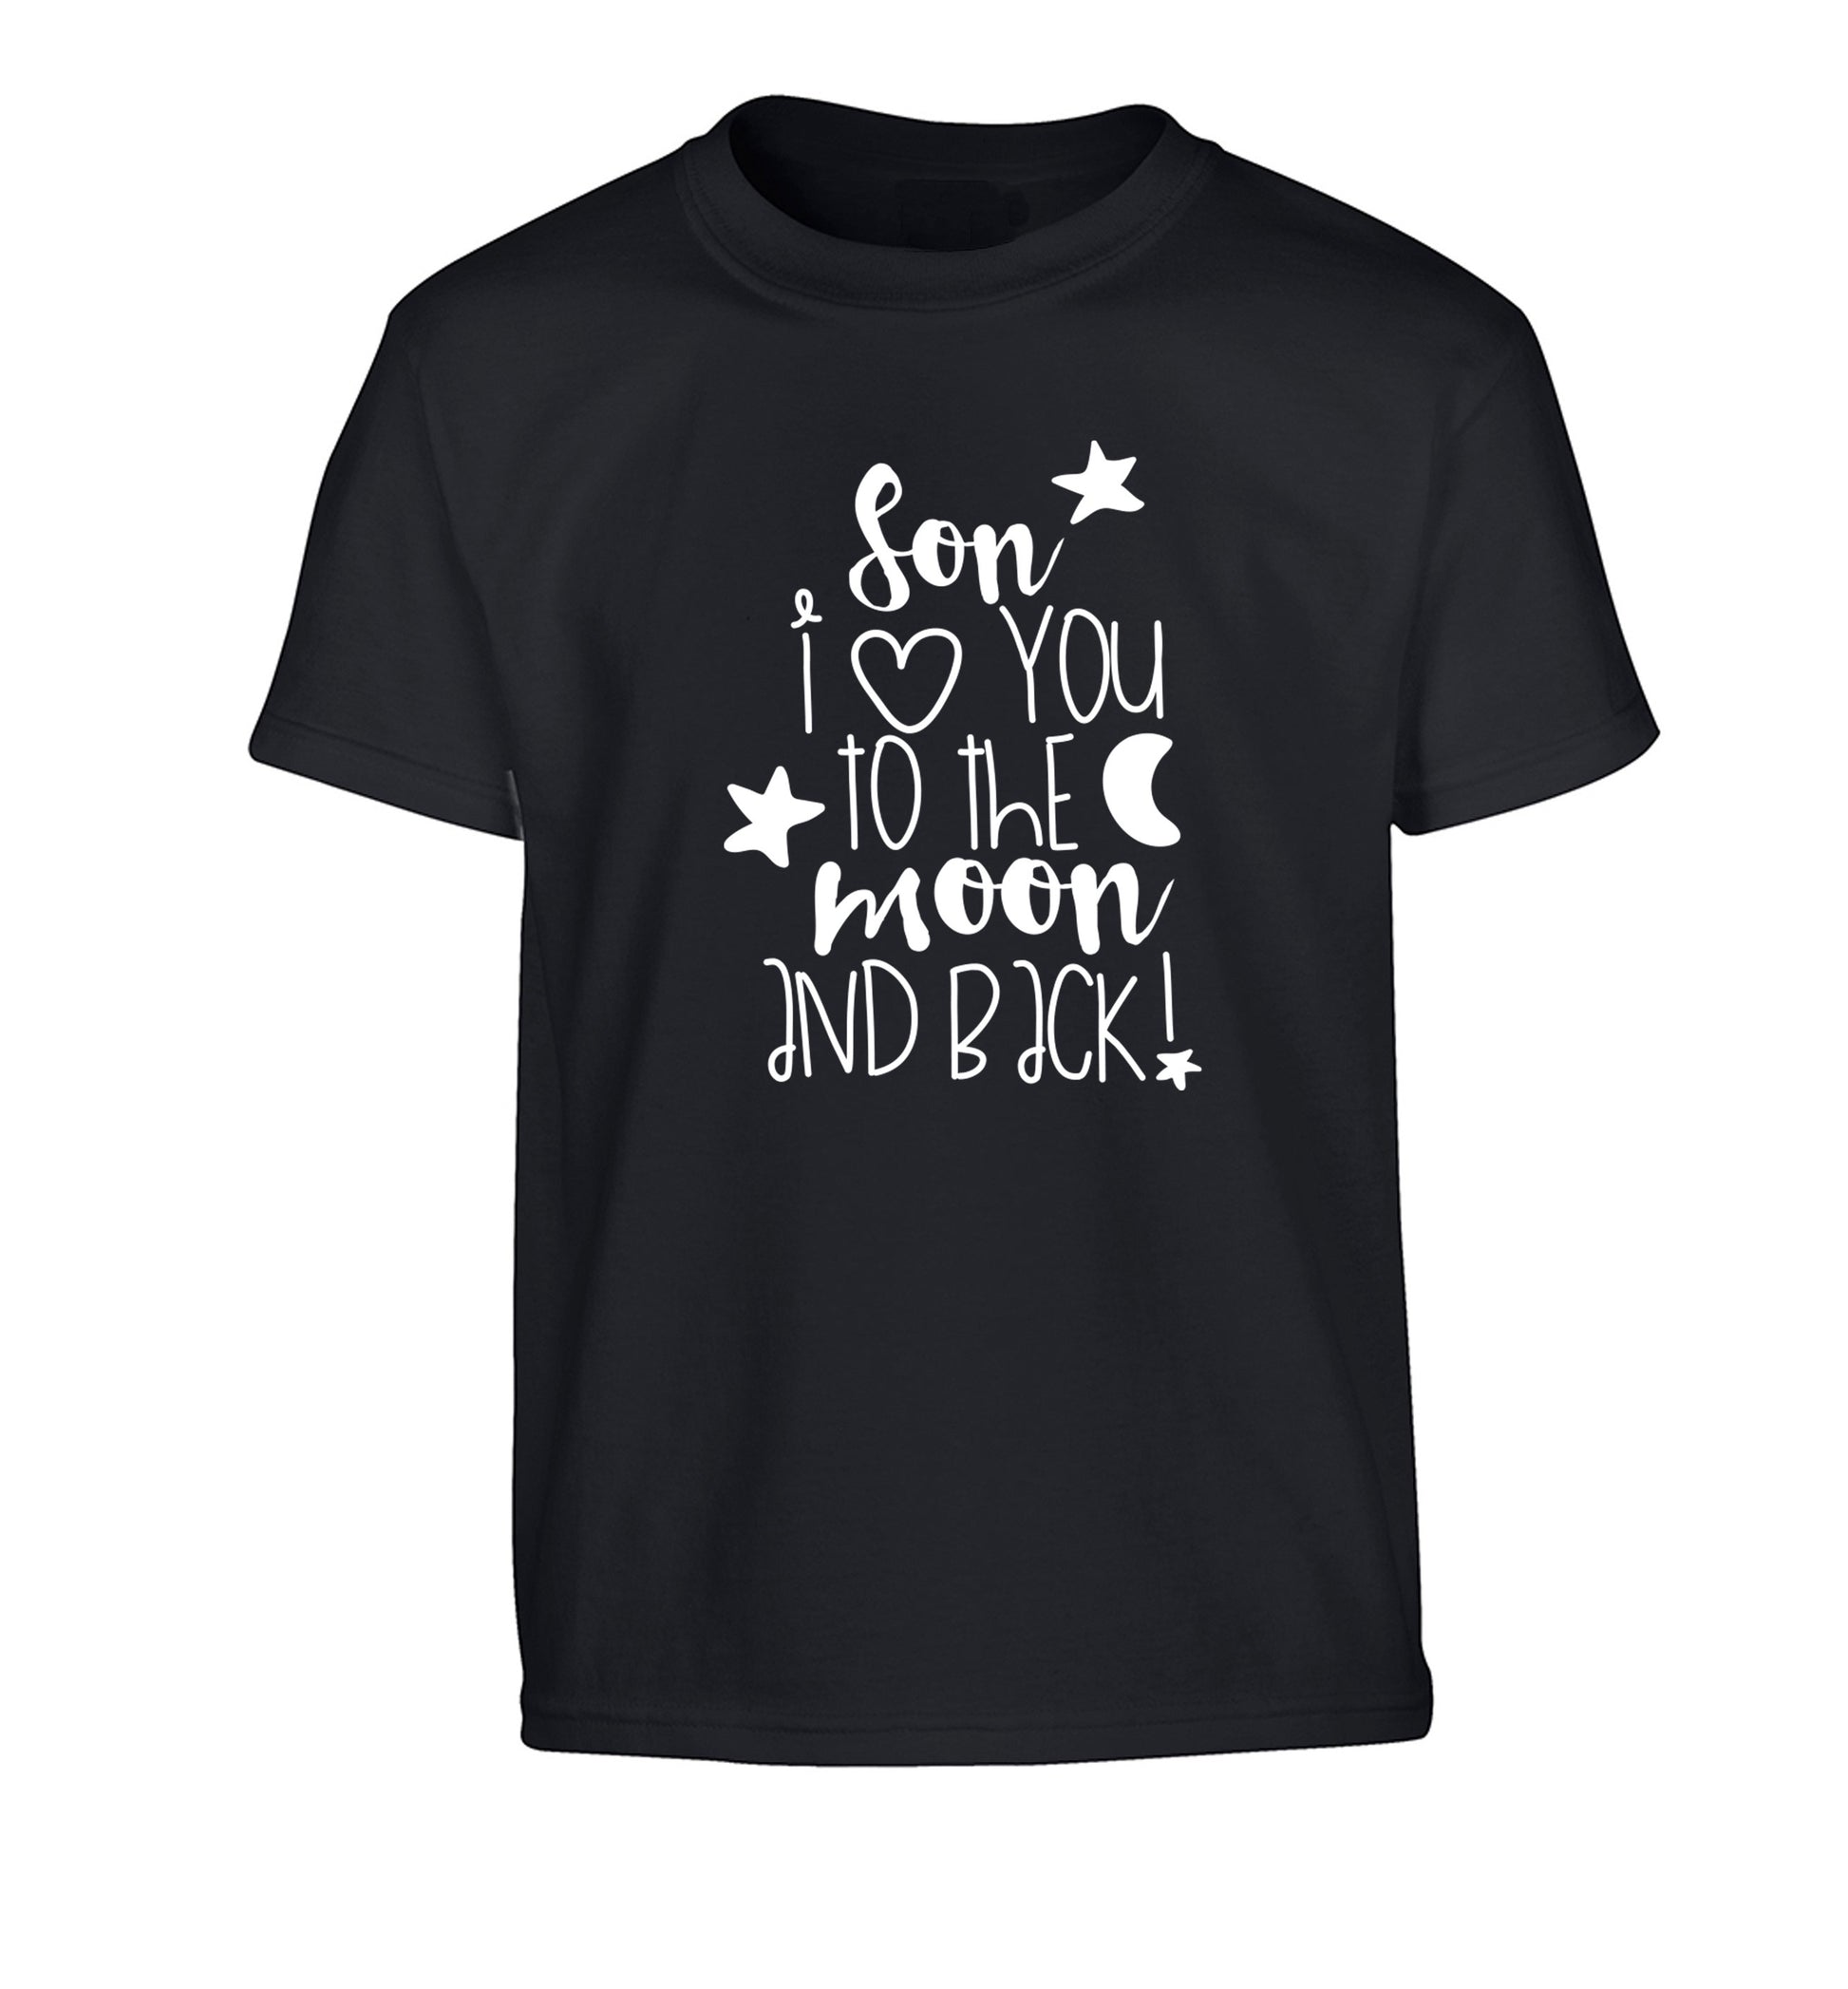 Son I love you to the moon and back Children's black Tshirt 12-14 Years